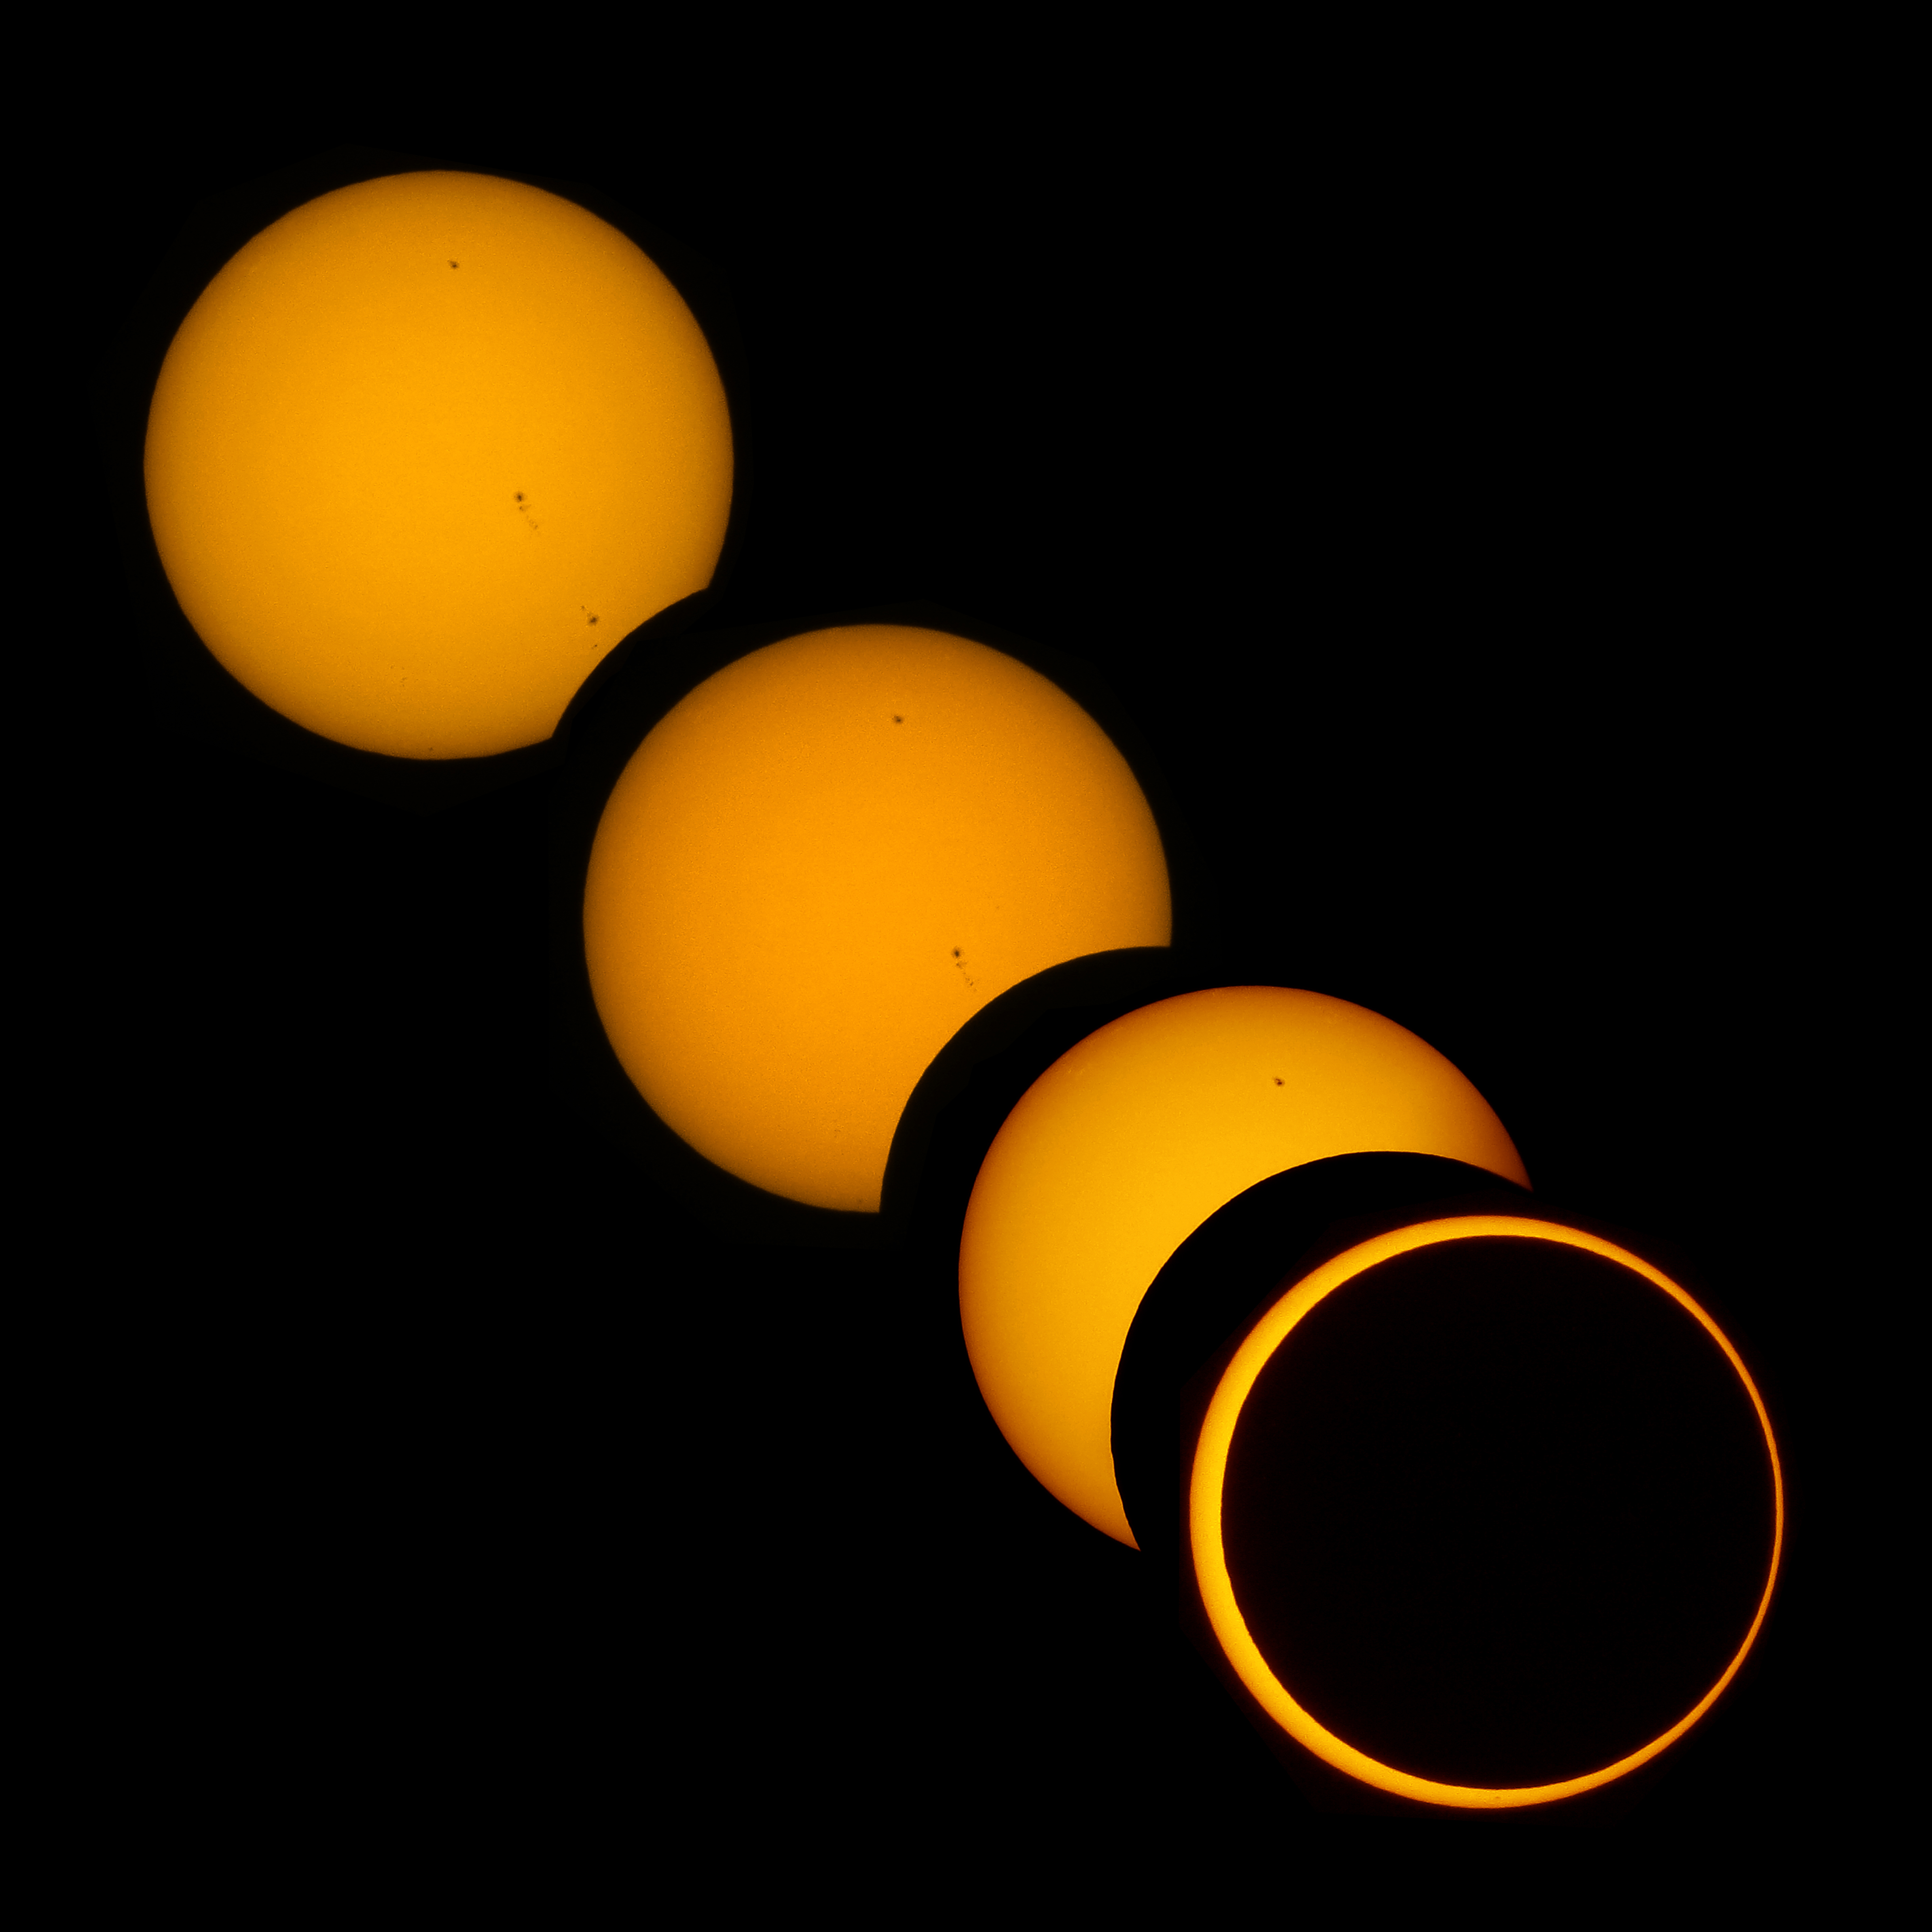 Annular solar eclipse of May 20, 2012